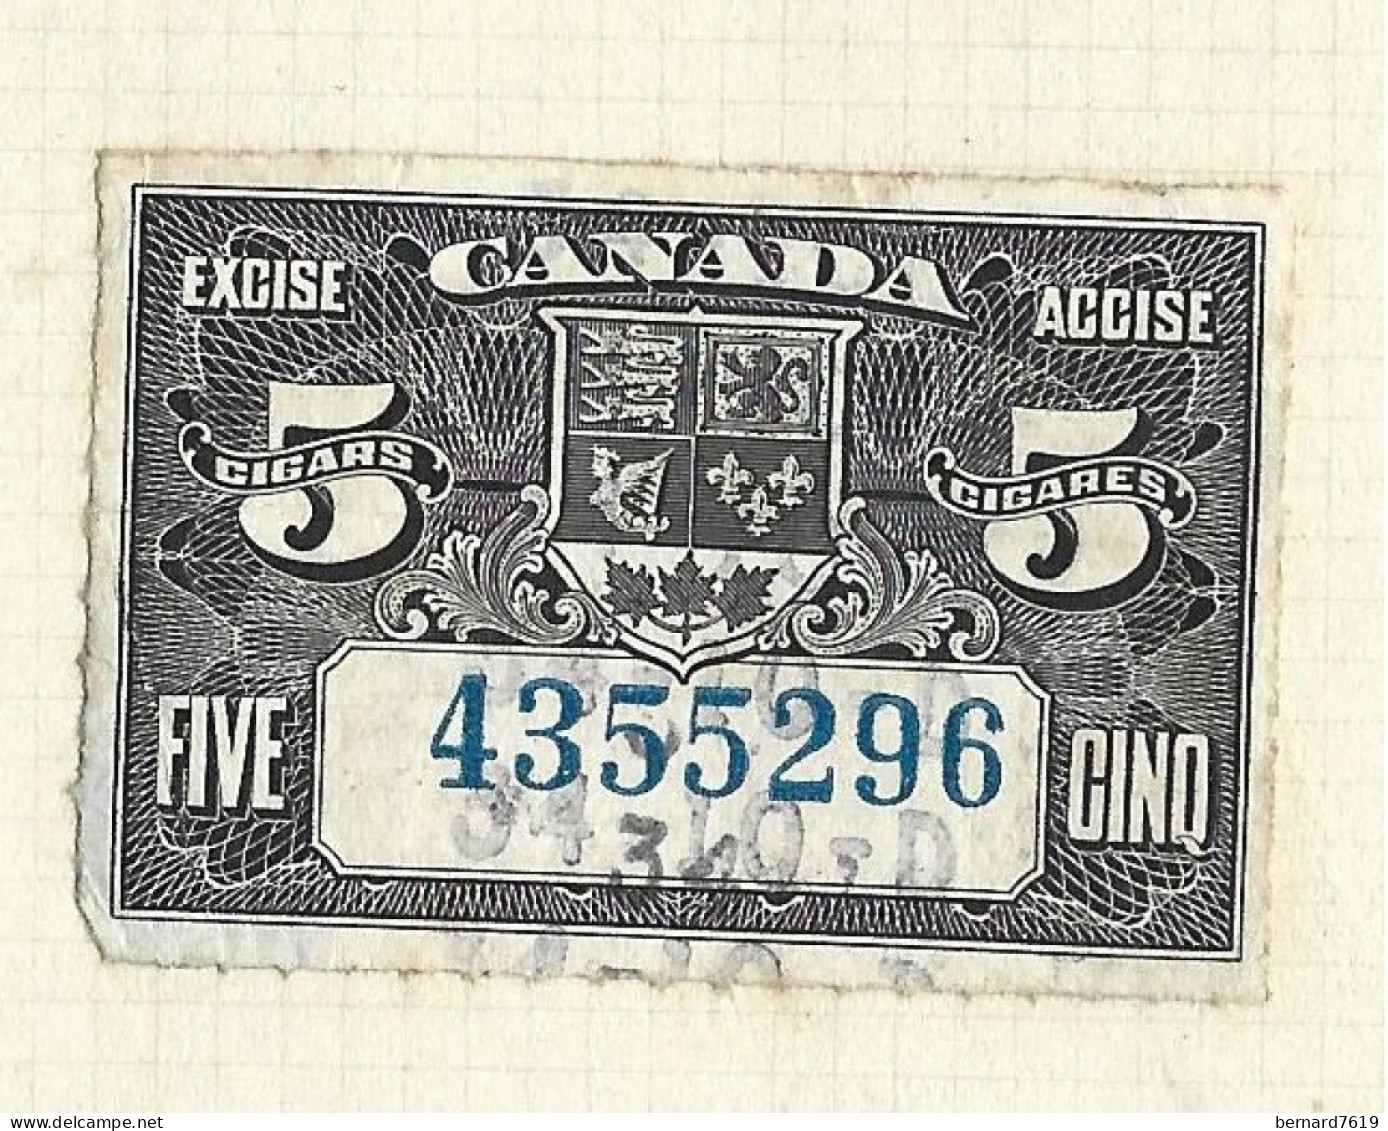 Timbres Taxe  -  Canada - Cigarette - Excise   Accise - 5  Cigarettes -4355296 - Fiscale Zegels